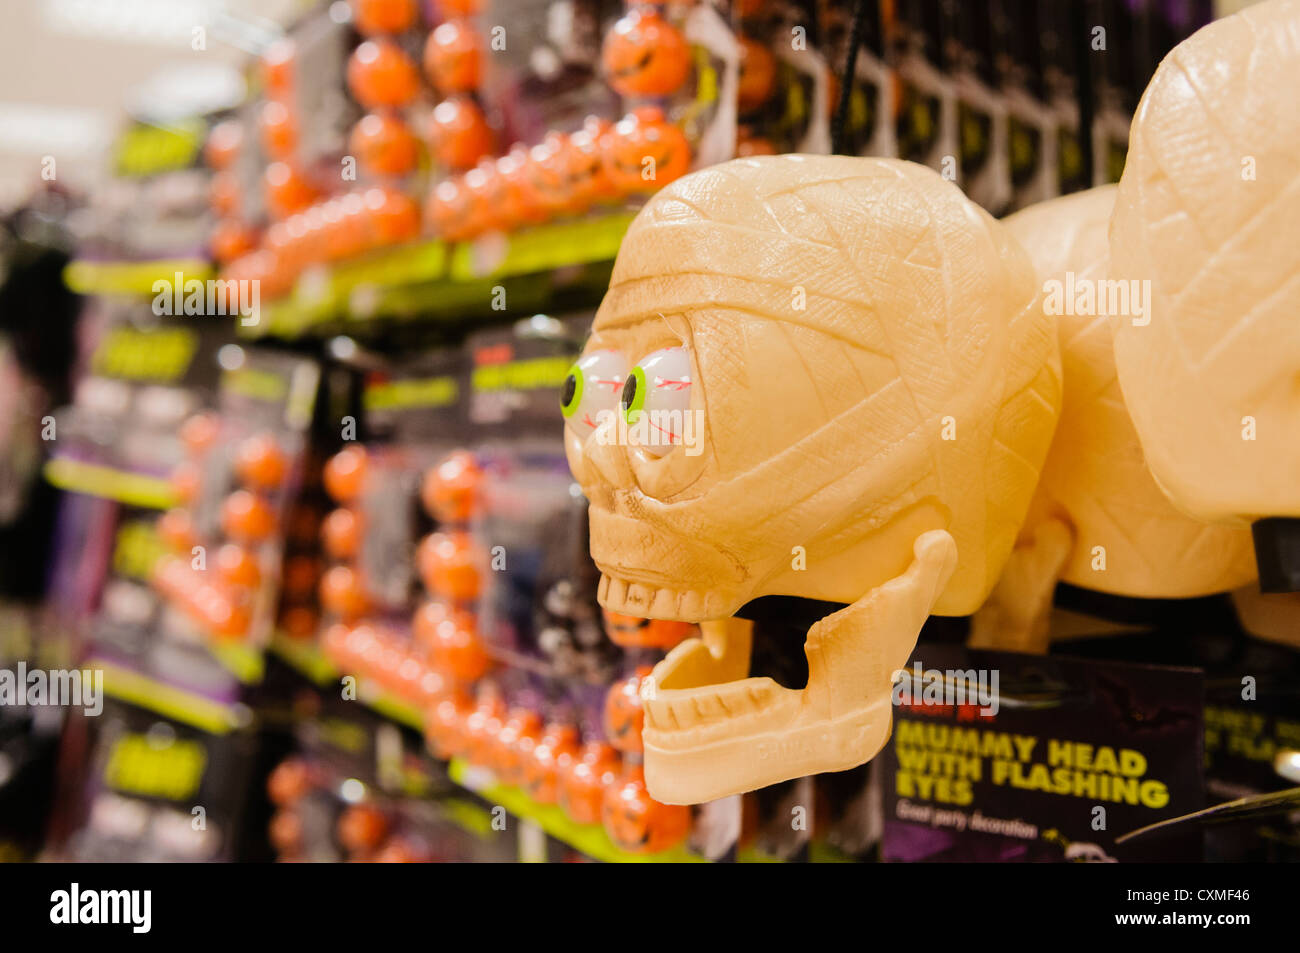 Seasonal Halloween goods on sale on the shelves in a Poundland shop store. Stock Photo